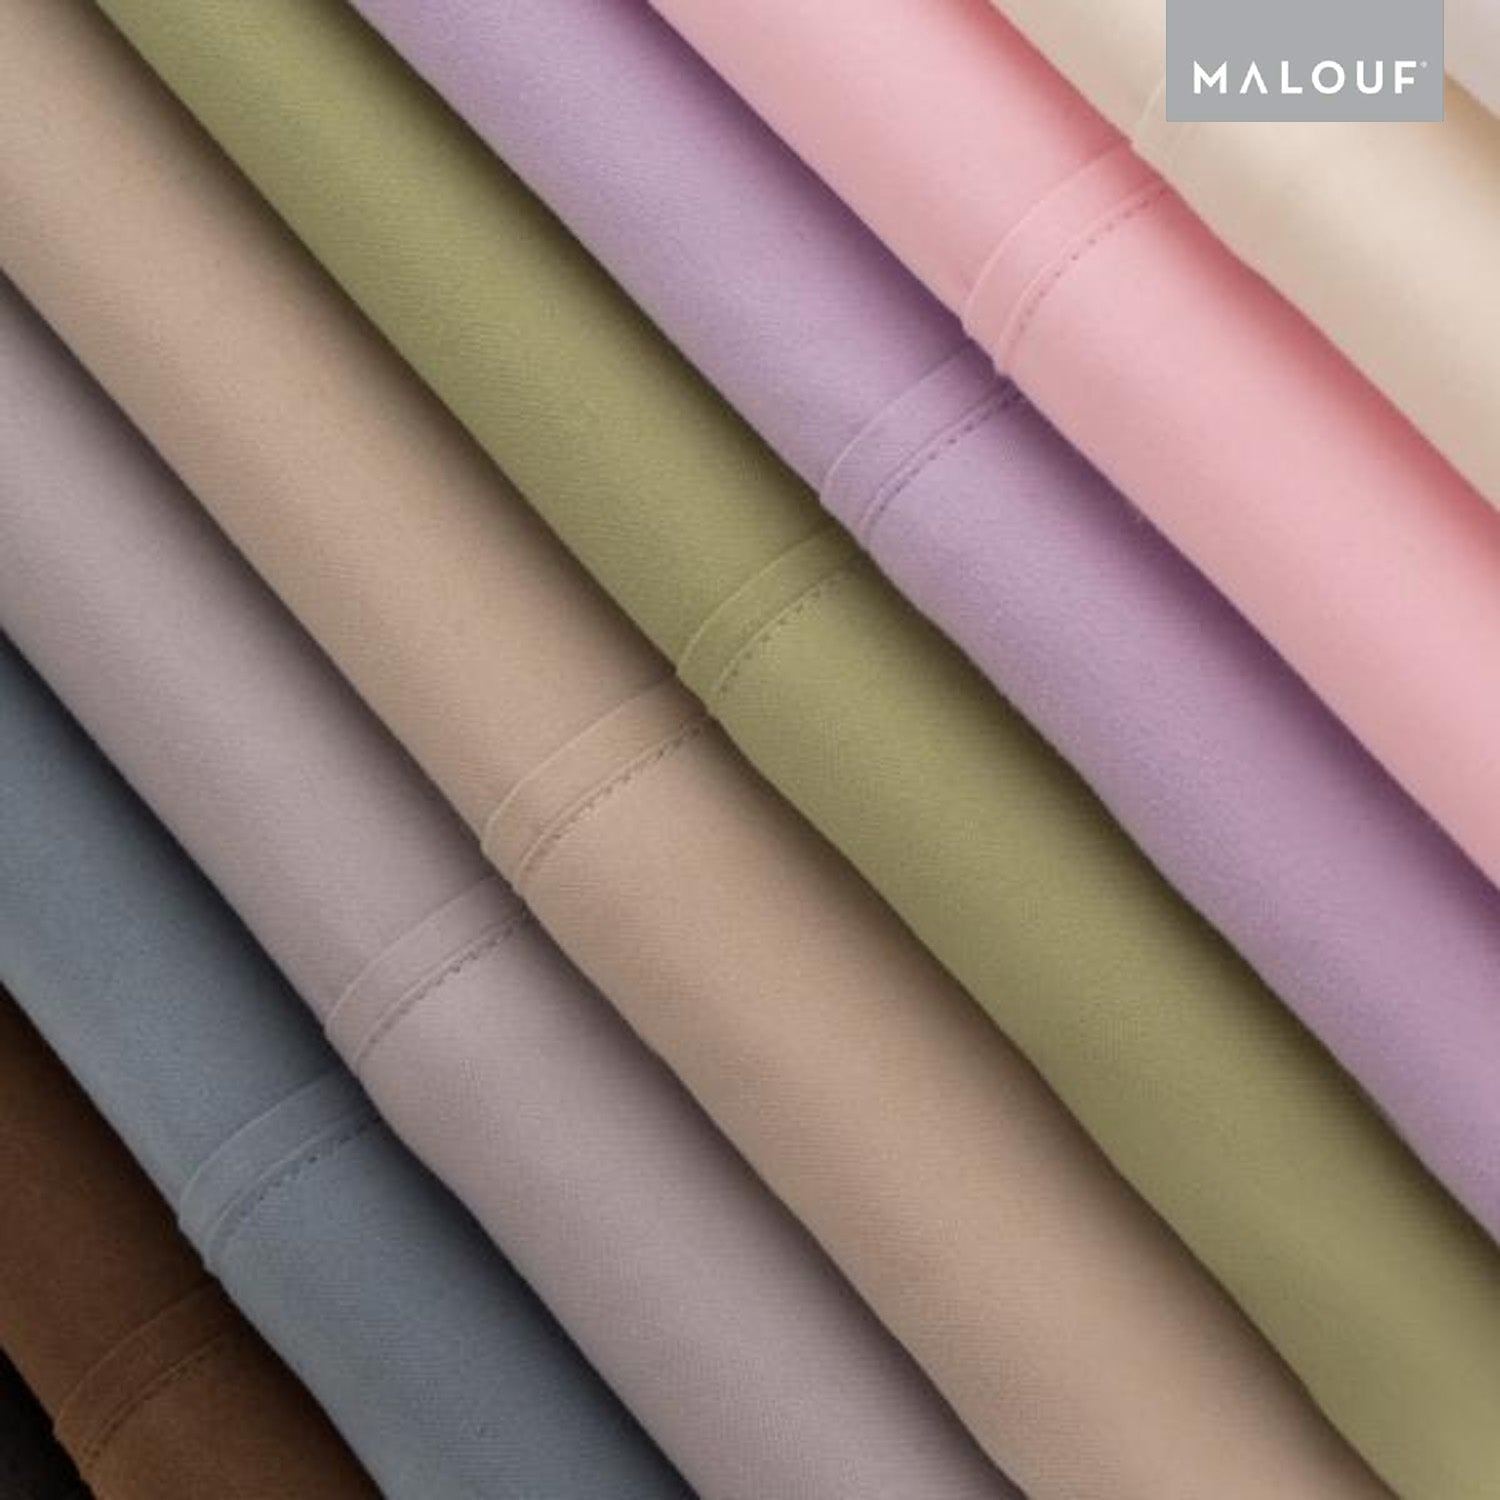 Malouf Woven Brushed Microfiber Bed Sheets